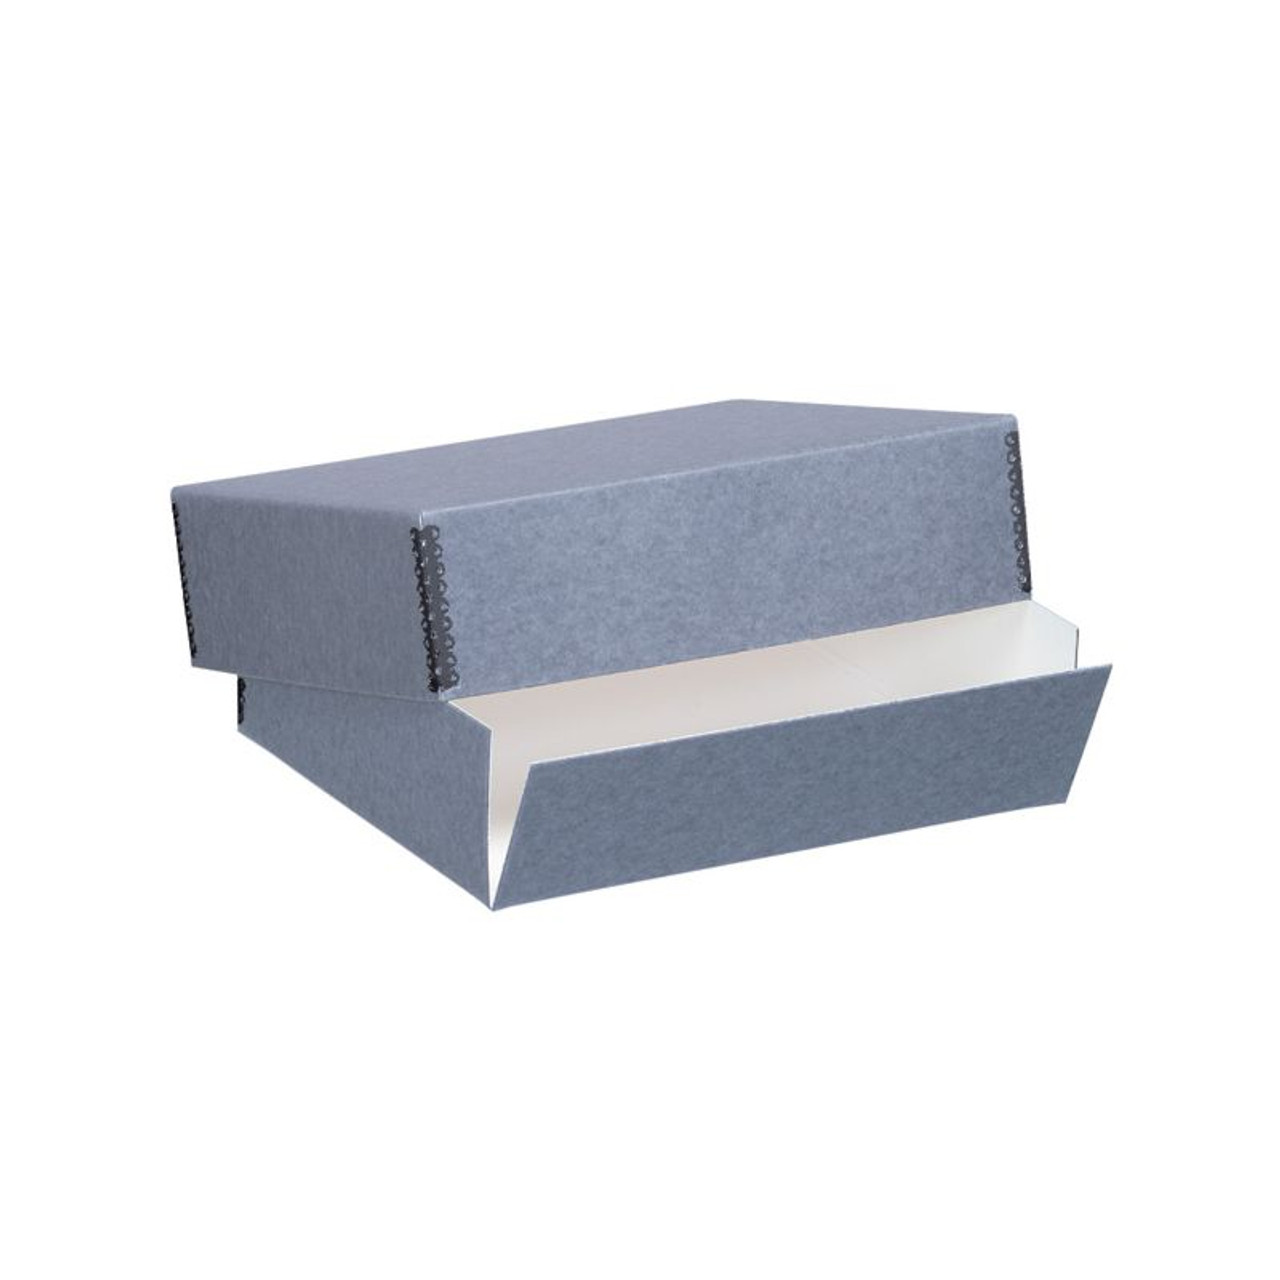 Lineco 11x17 Blue/Gray 3 Deep Museum Storage Box Archival with Metal Edge